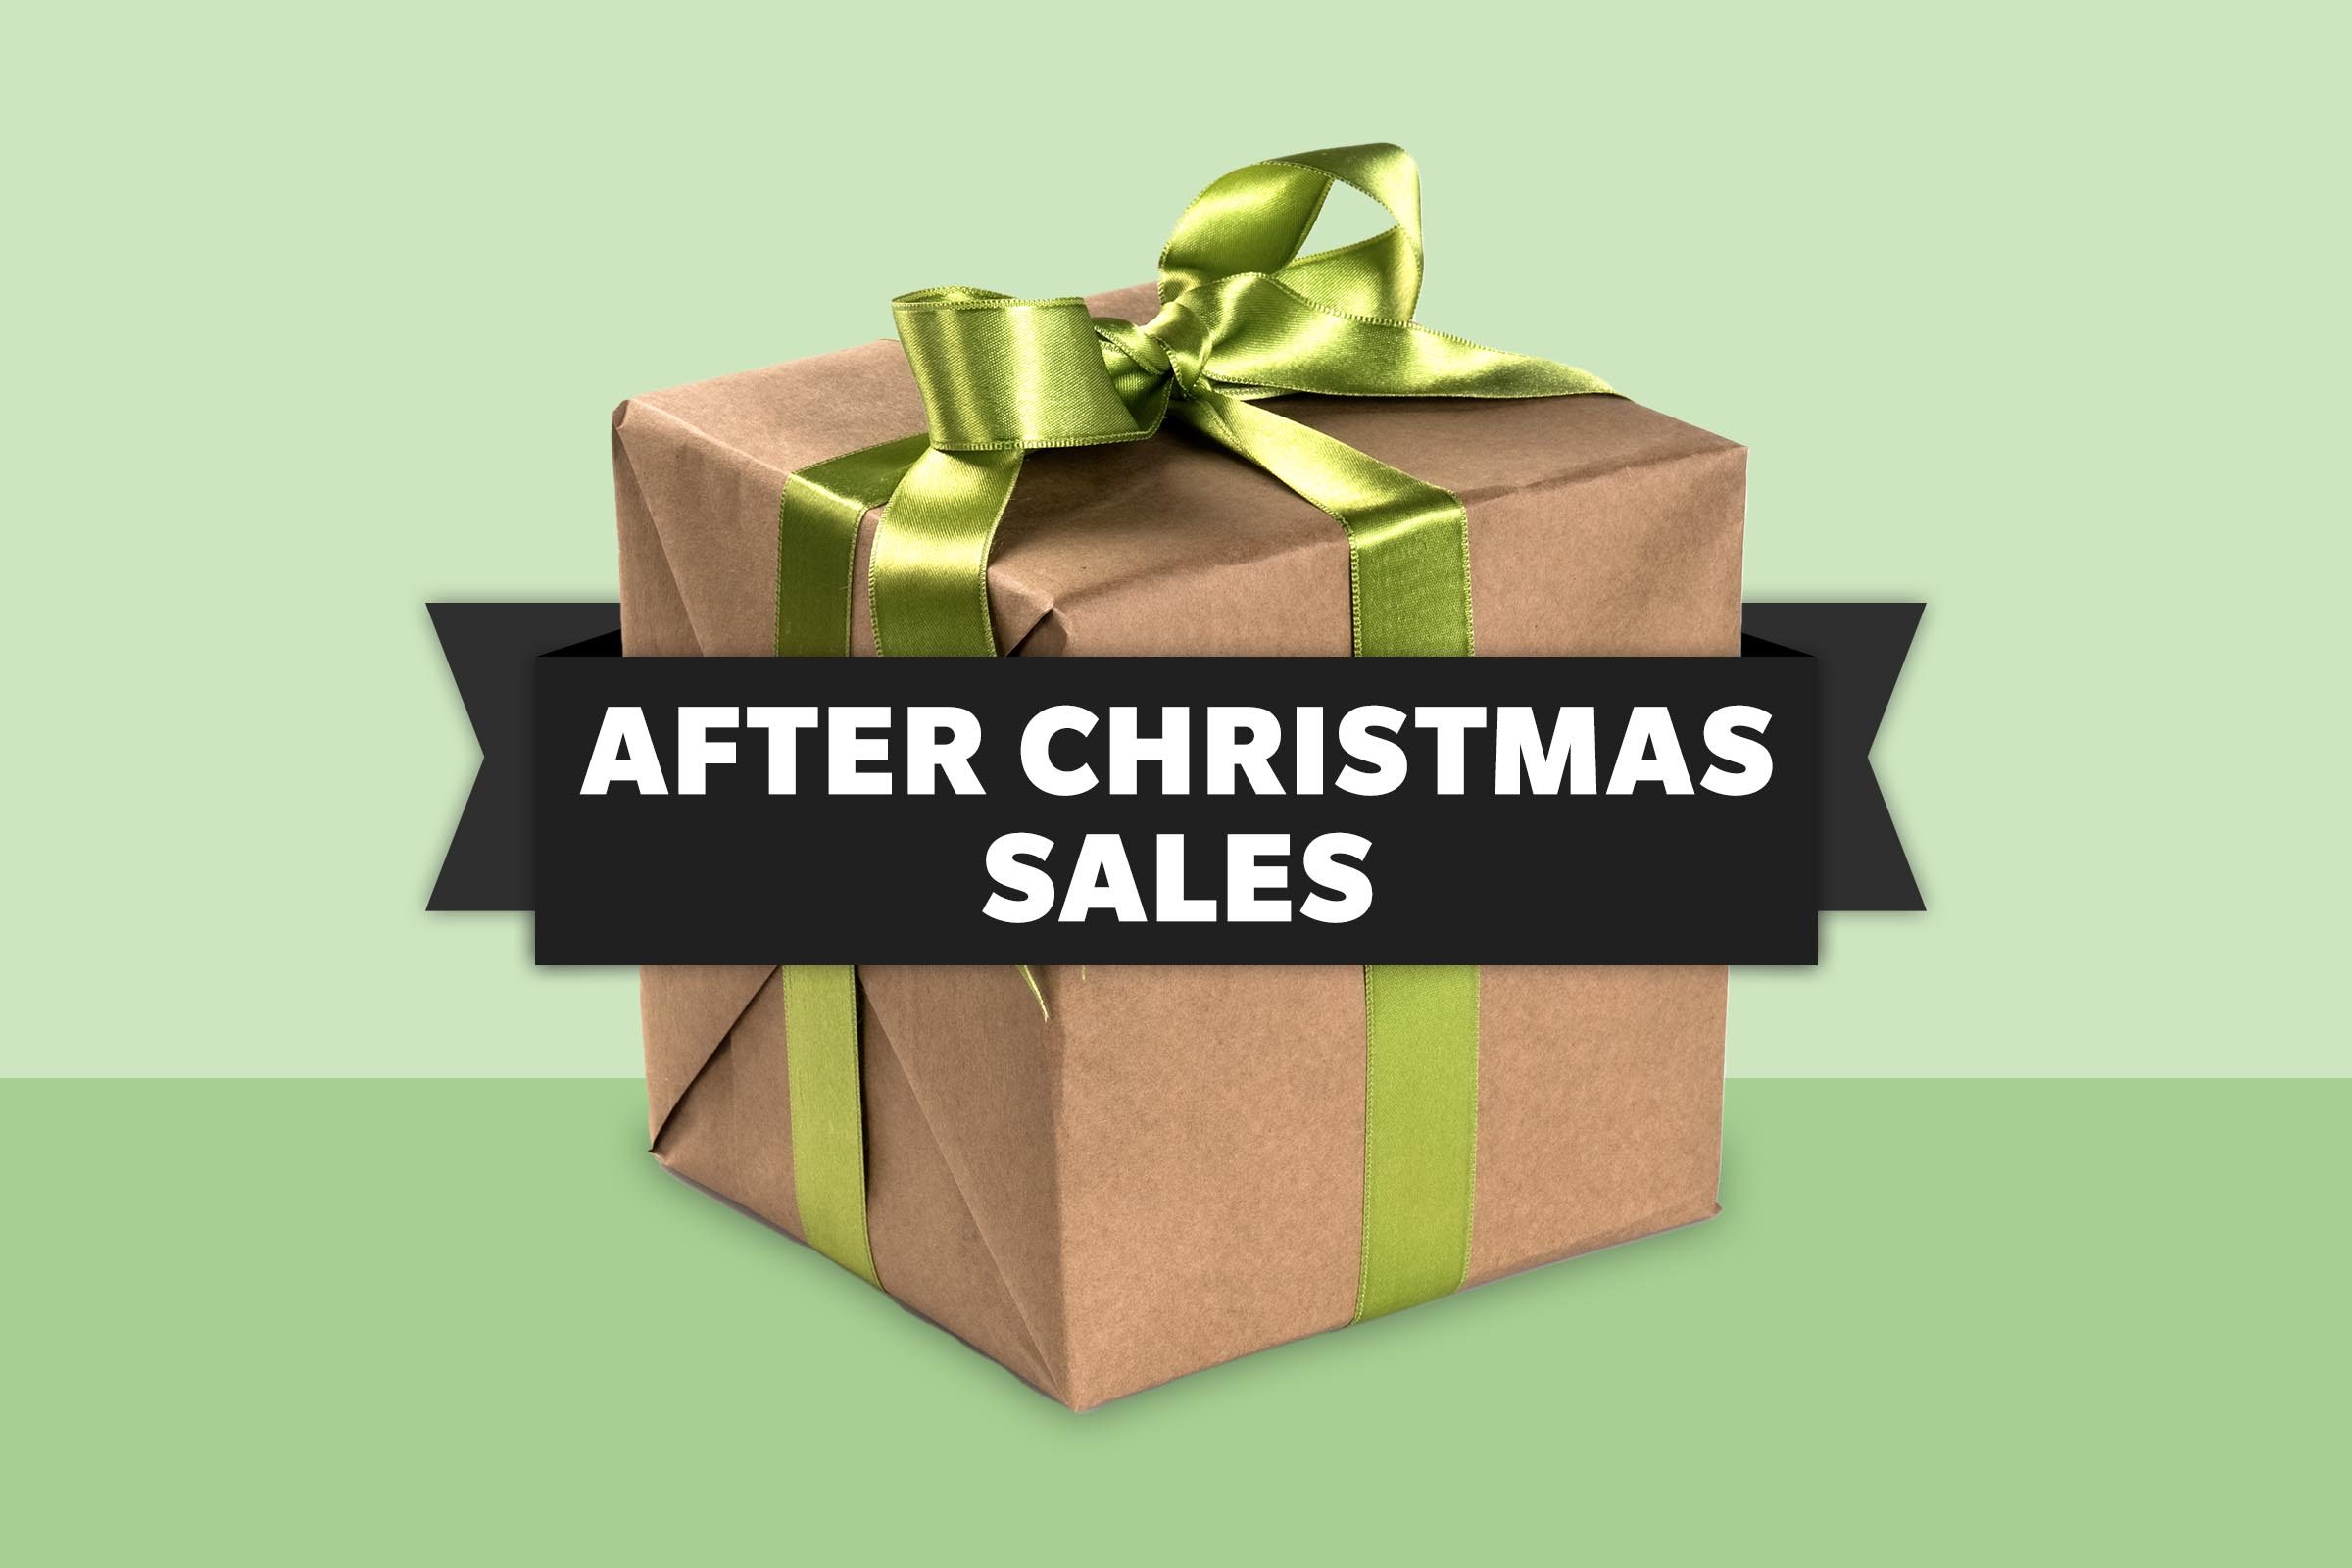 https://www.rd.com/wp-content/uploads/2021/11/After-Christmas-Sales-FT-GettyImages-182363336.jpg